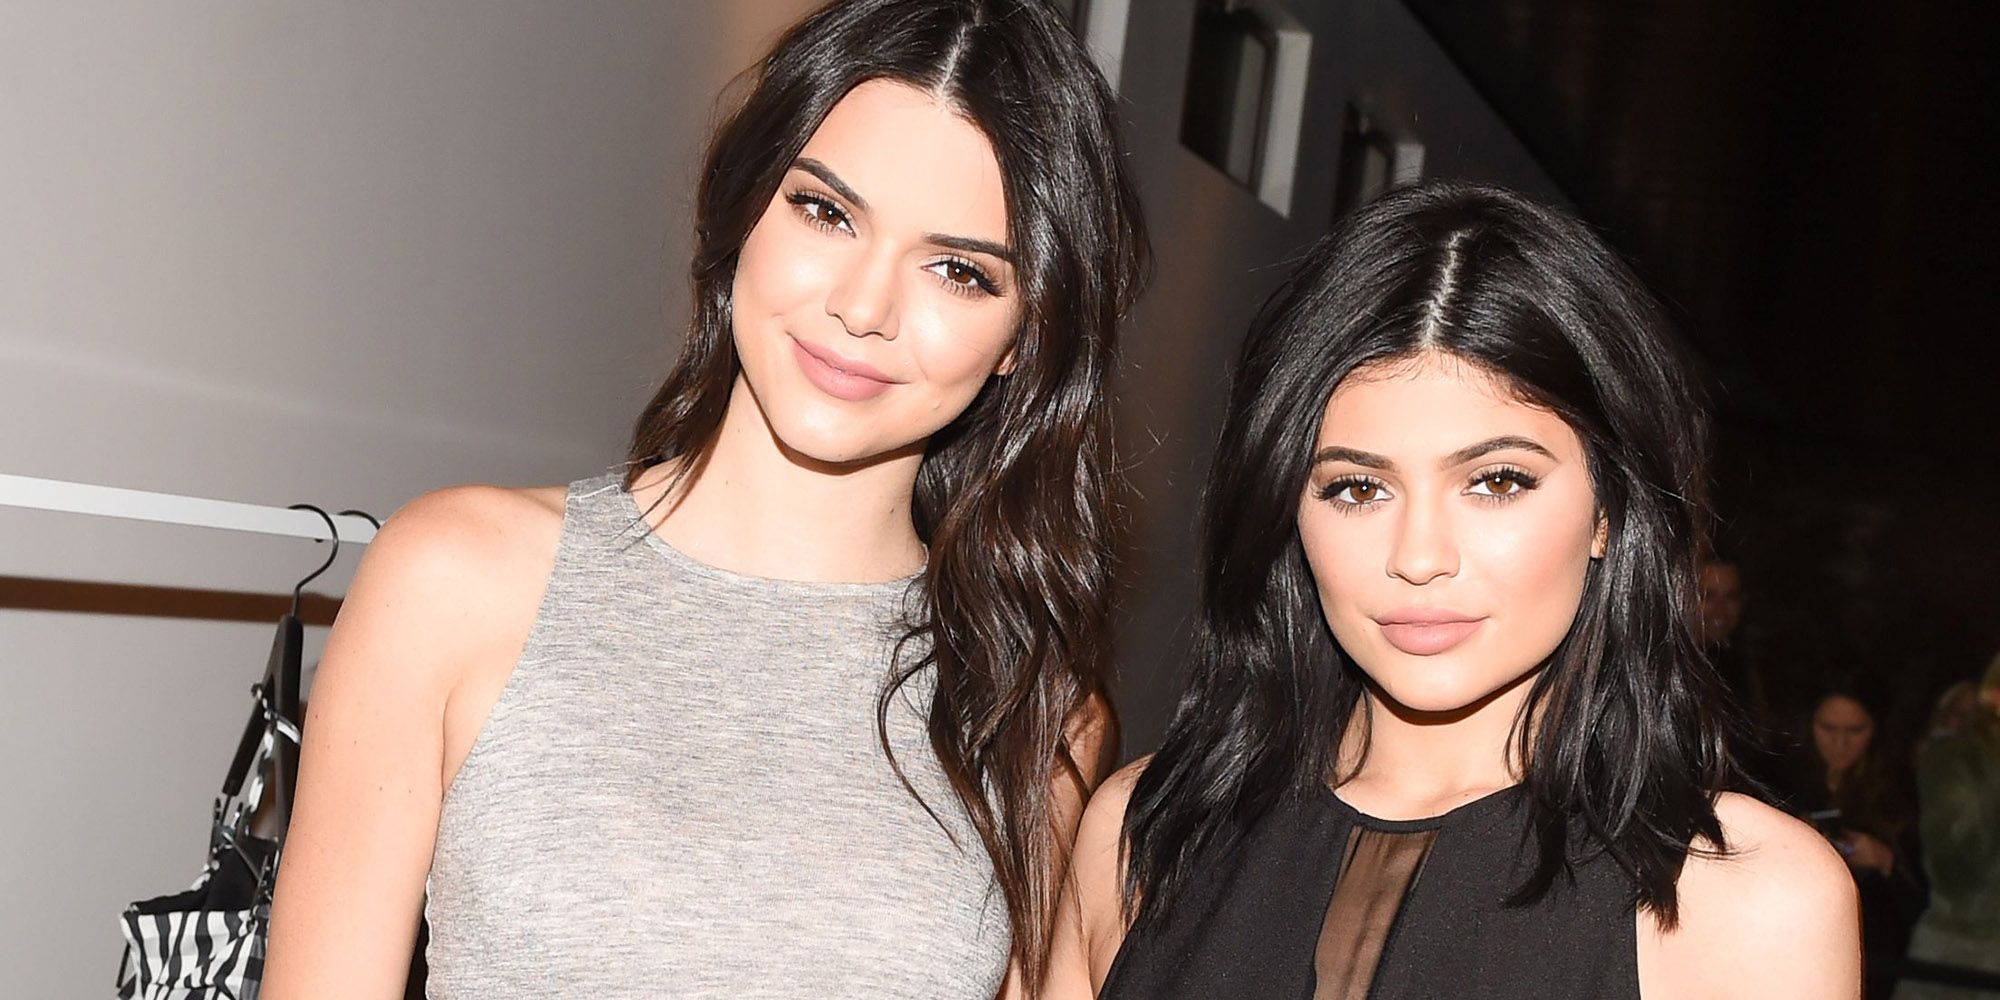 Fun Facts About Kendall and Kylie